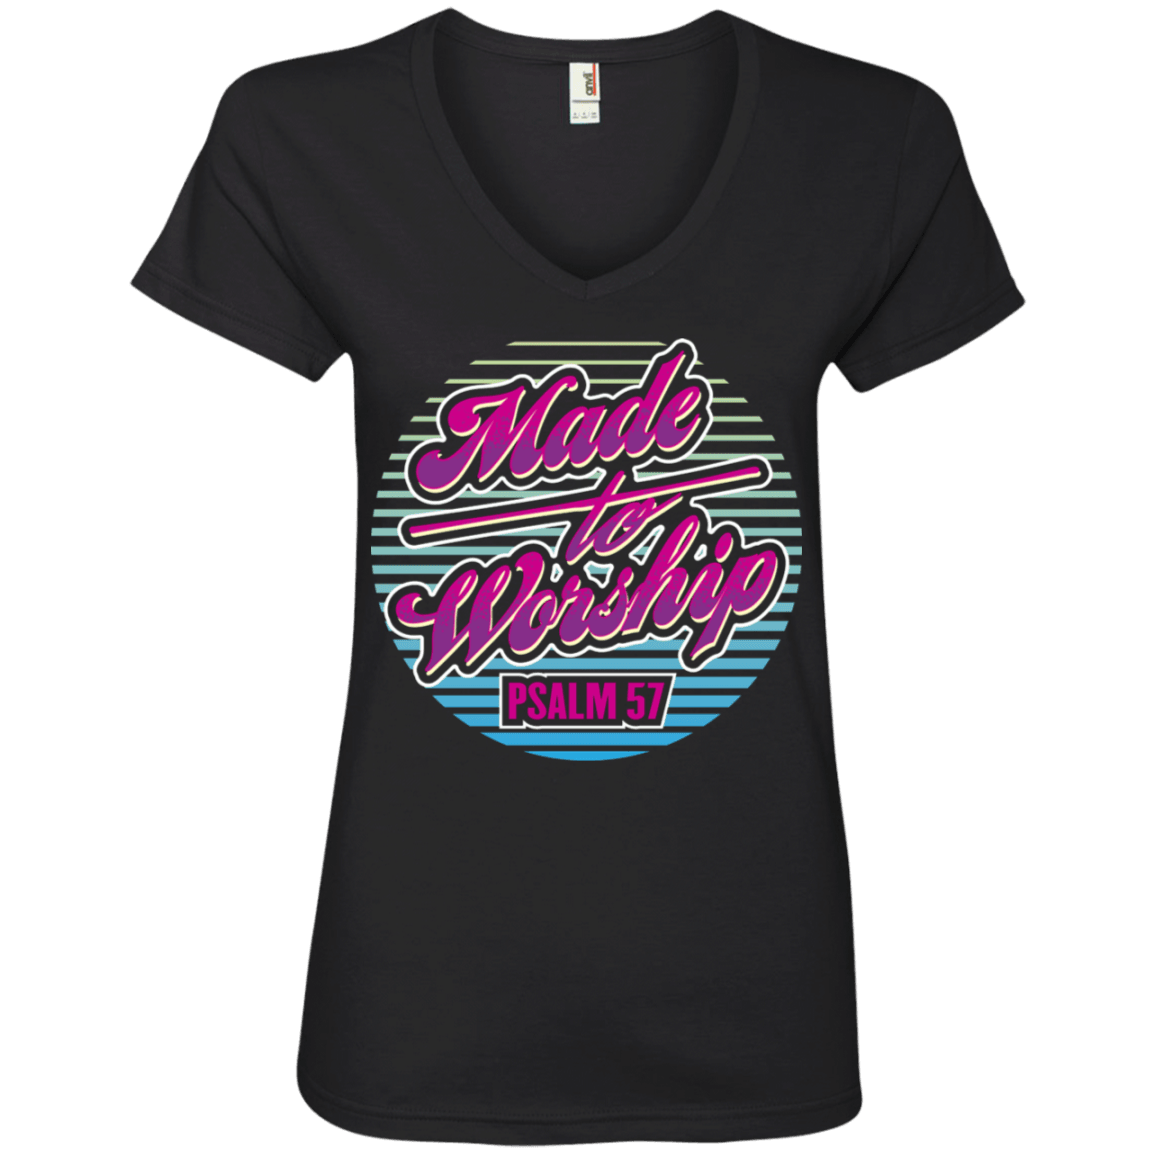 Designs by MyUtopia Shout Out:Made To Worship Ladies' V-Neck T-Shirt,S / Black,Ladies T-Shirts